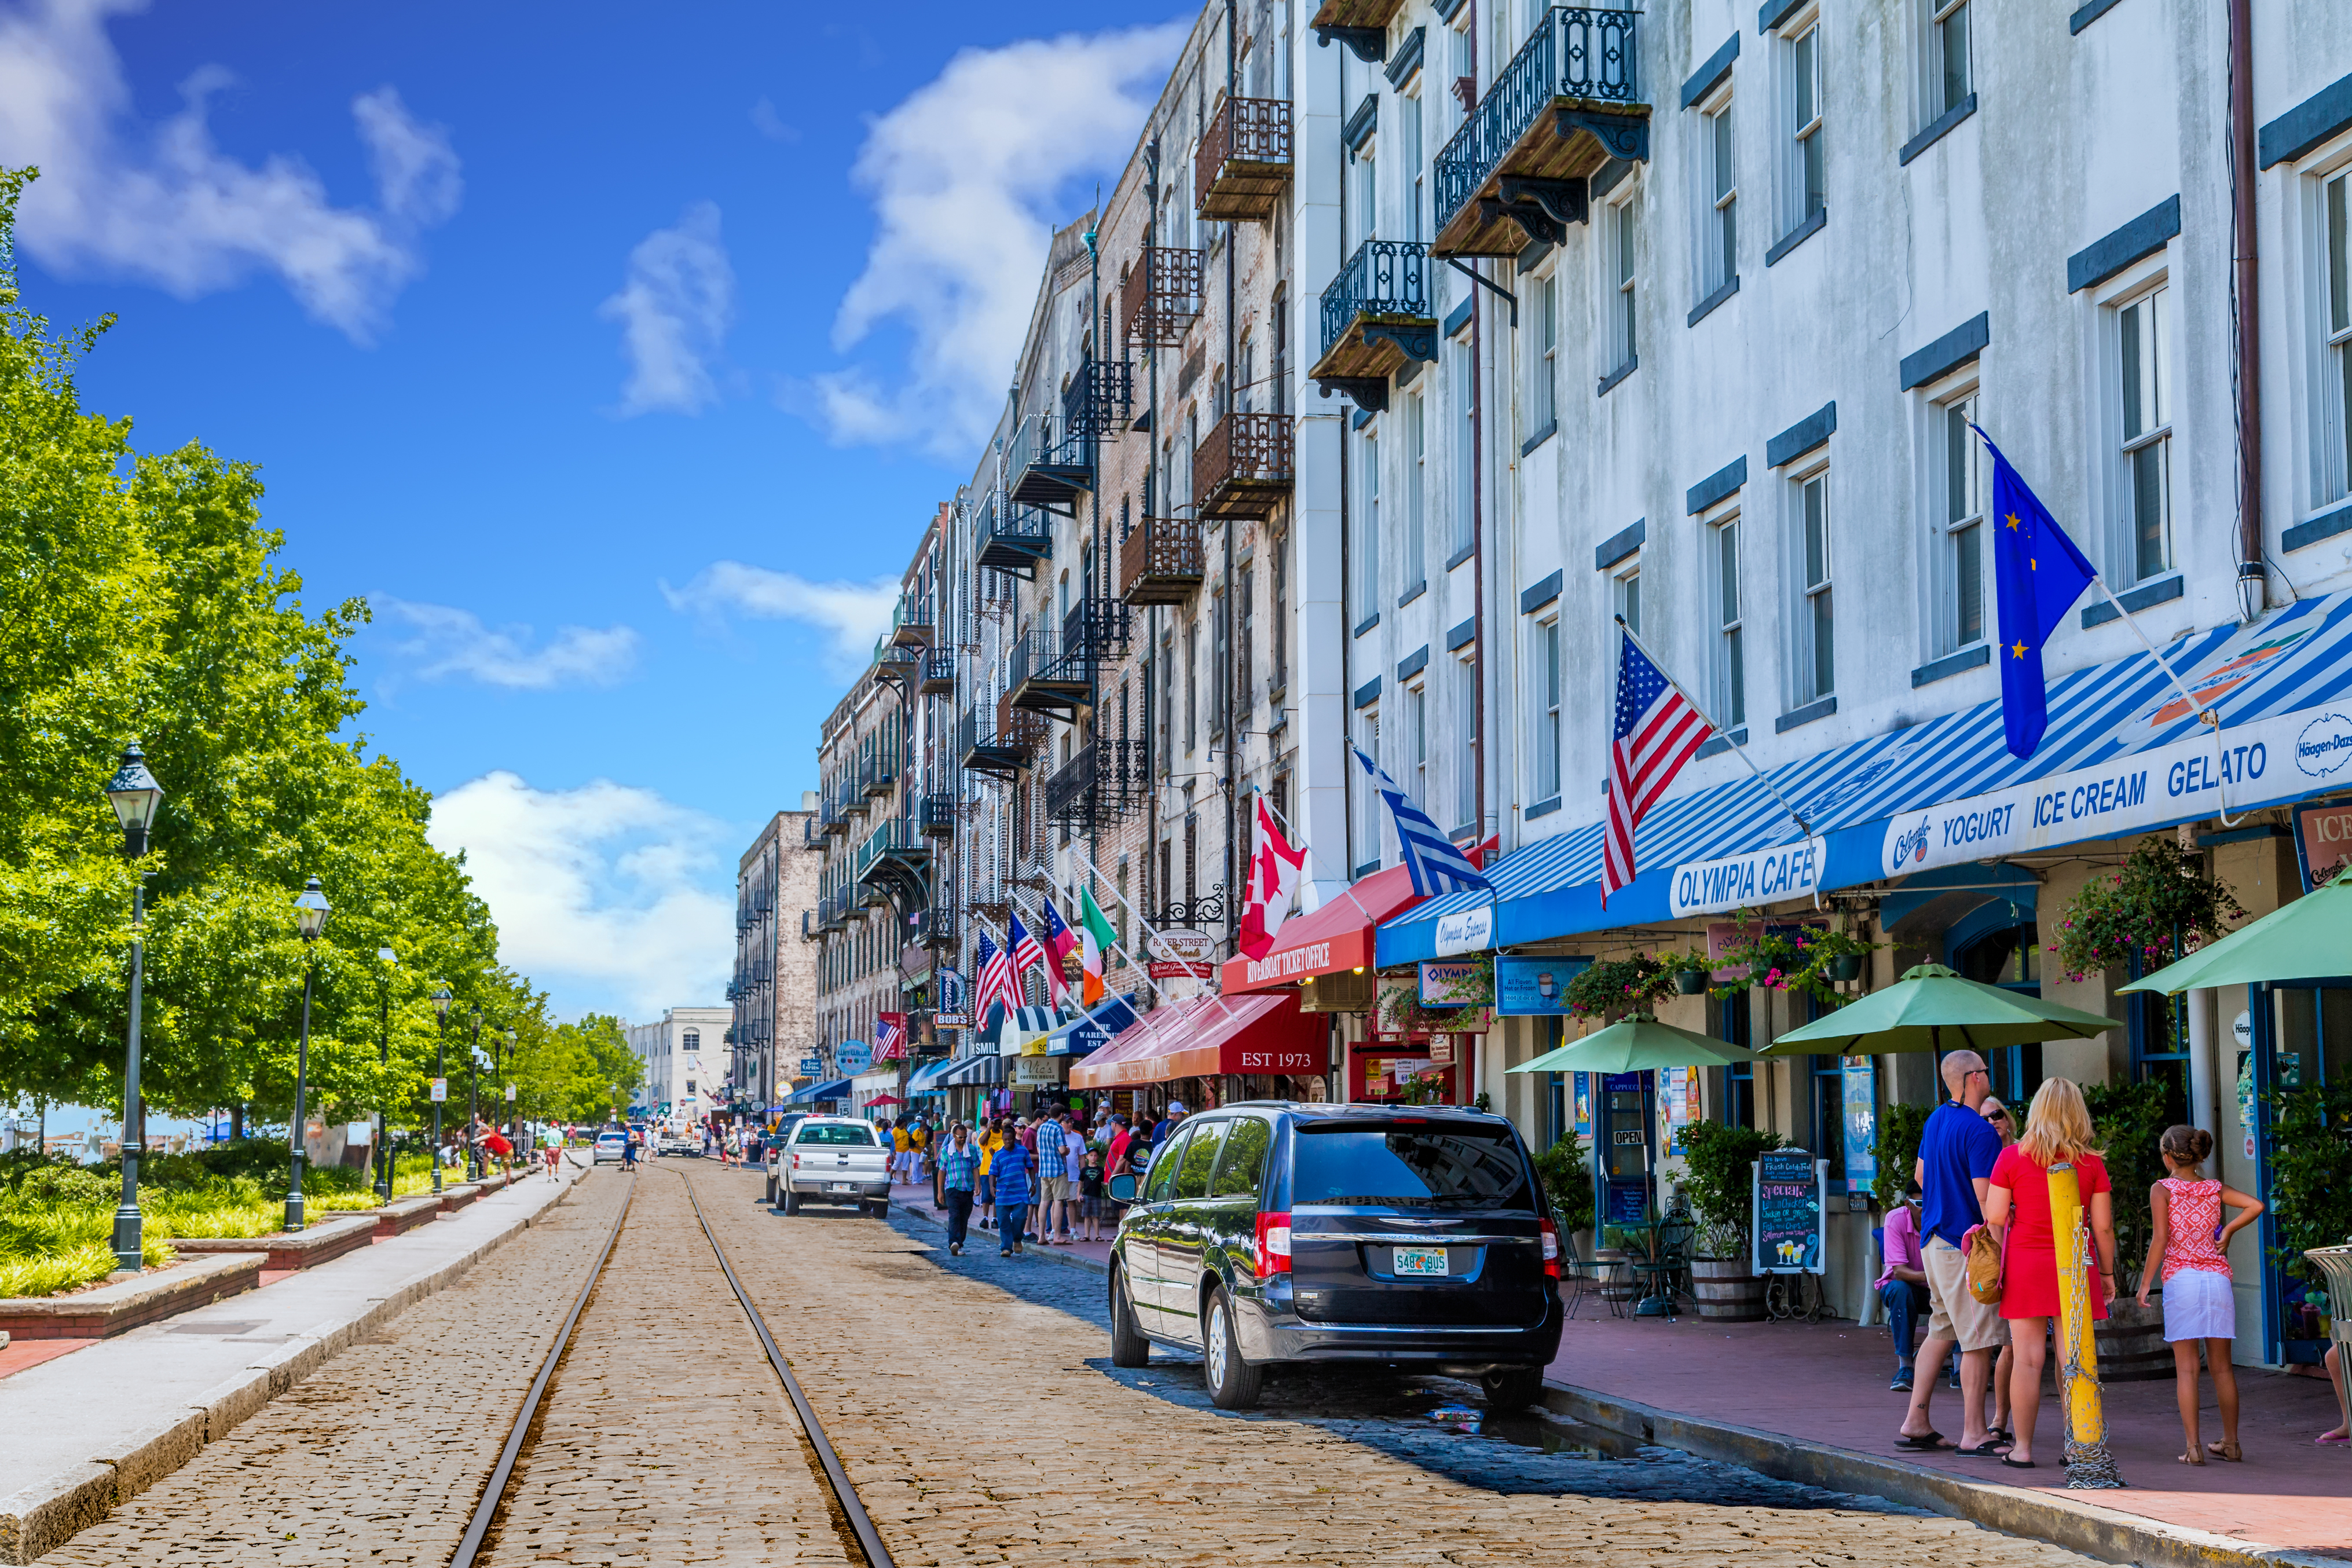 Plan an Amazing Family Vacation with These Best Things to Do in Savannah - River Street